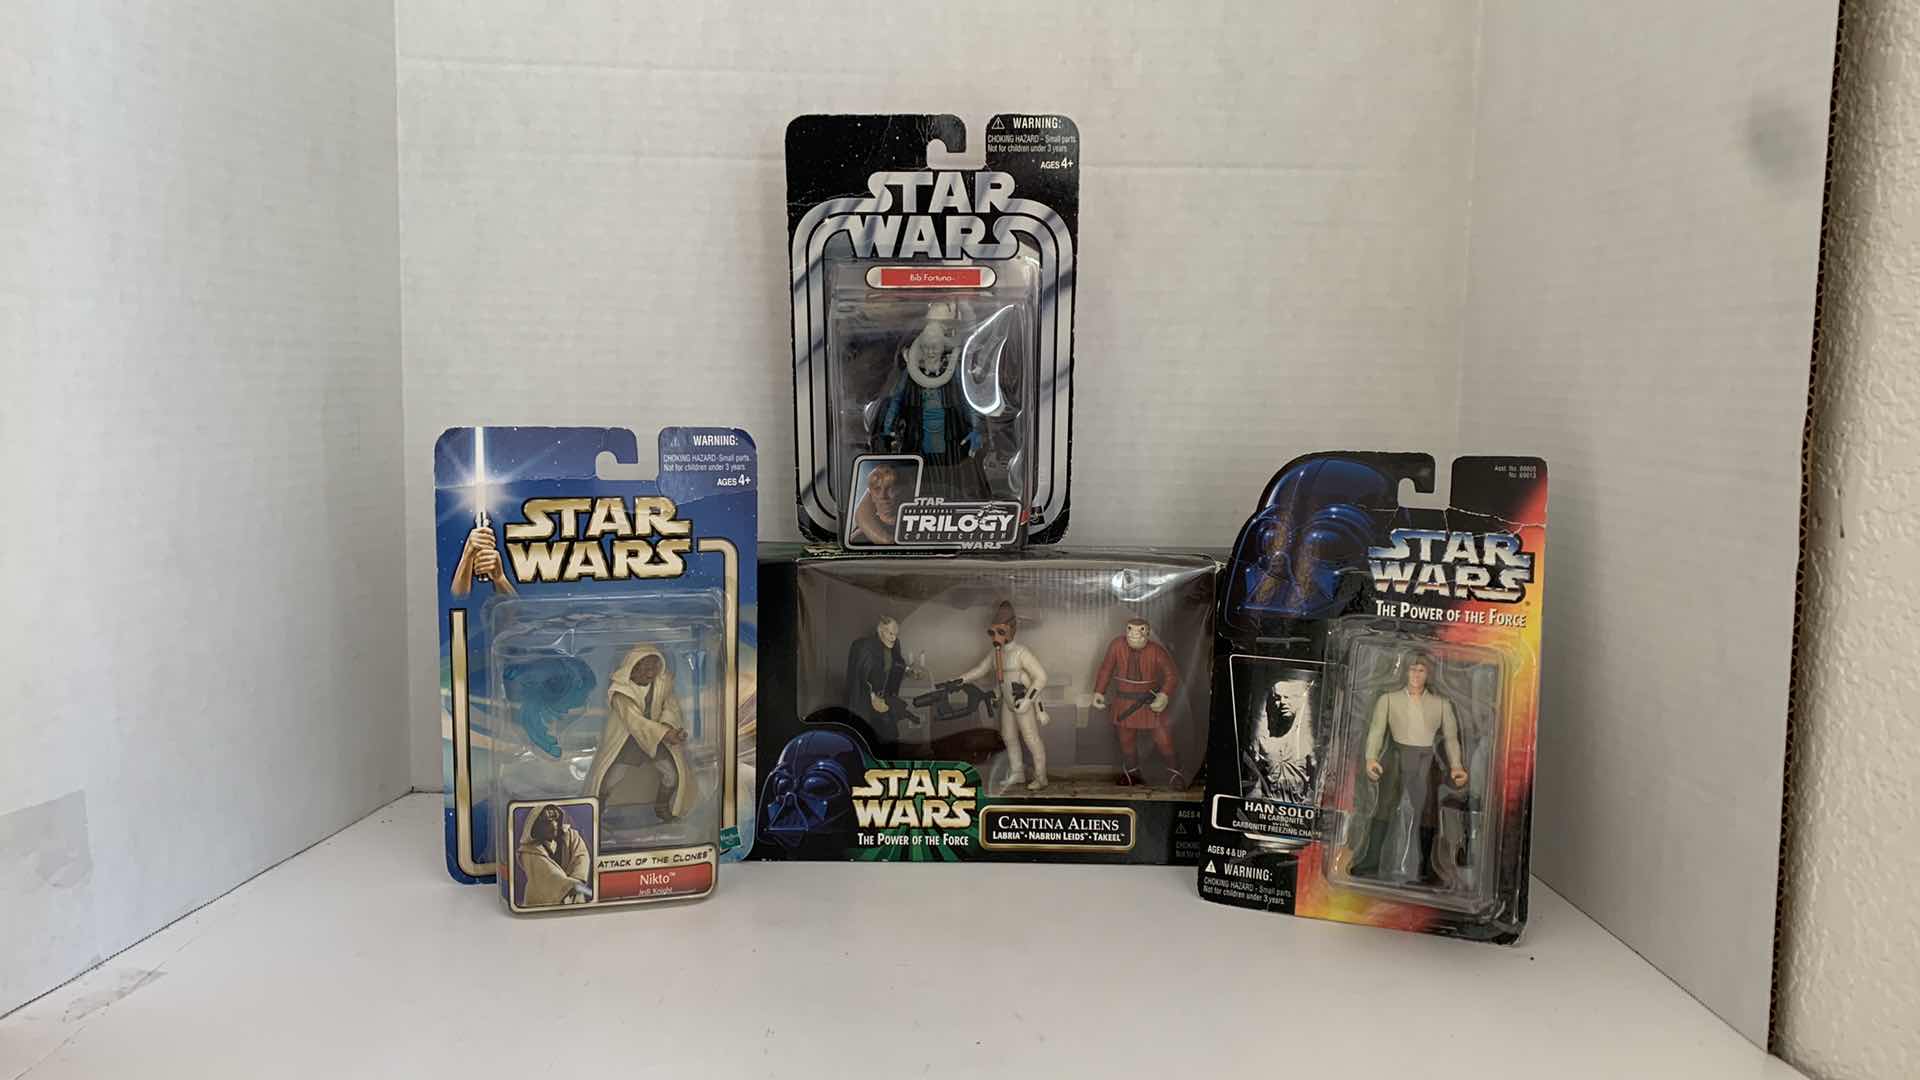 Photo 1 of SET OF 4 STAR WARS FIGURES IN BOX